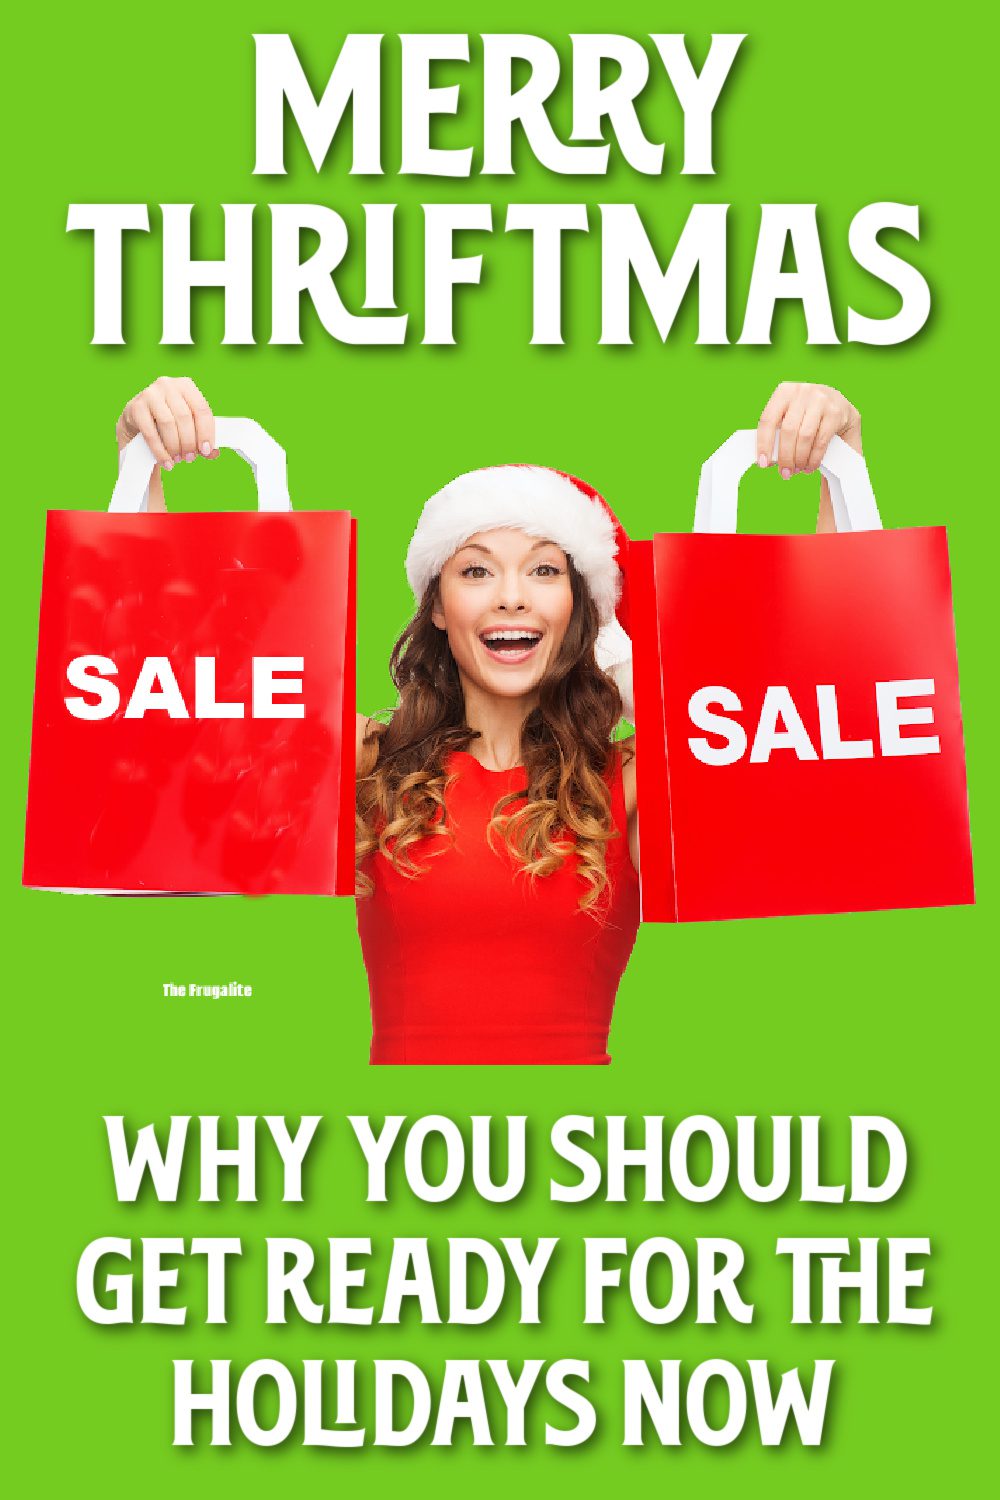 Merry Thriftmas: Why You Should Get Ready for the Holidays NOW